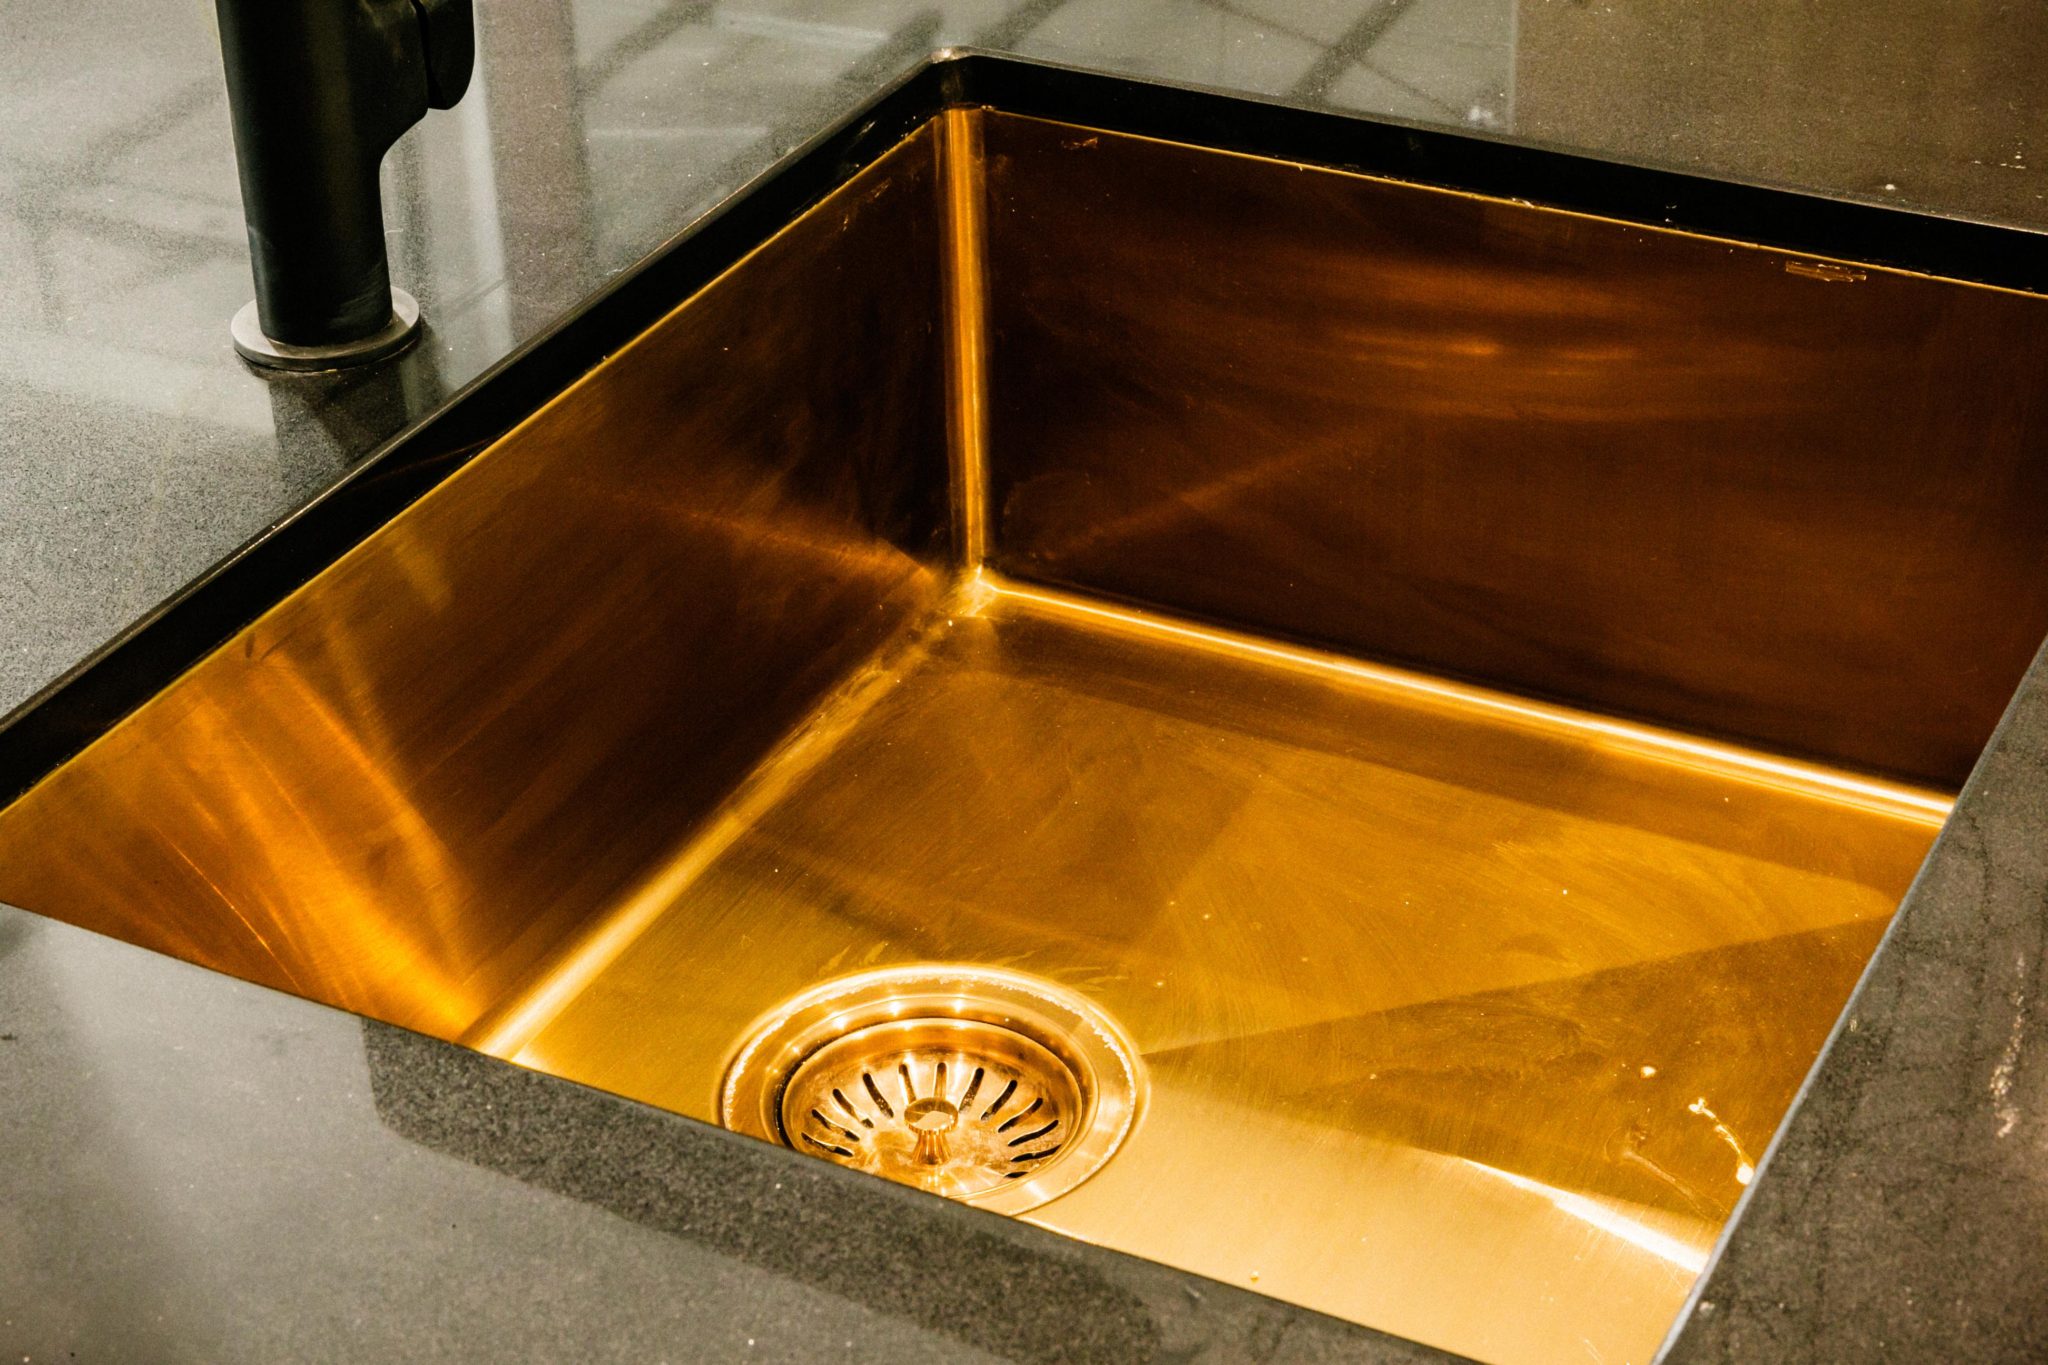 The copper sink!